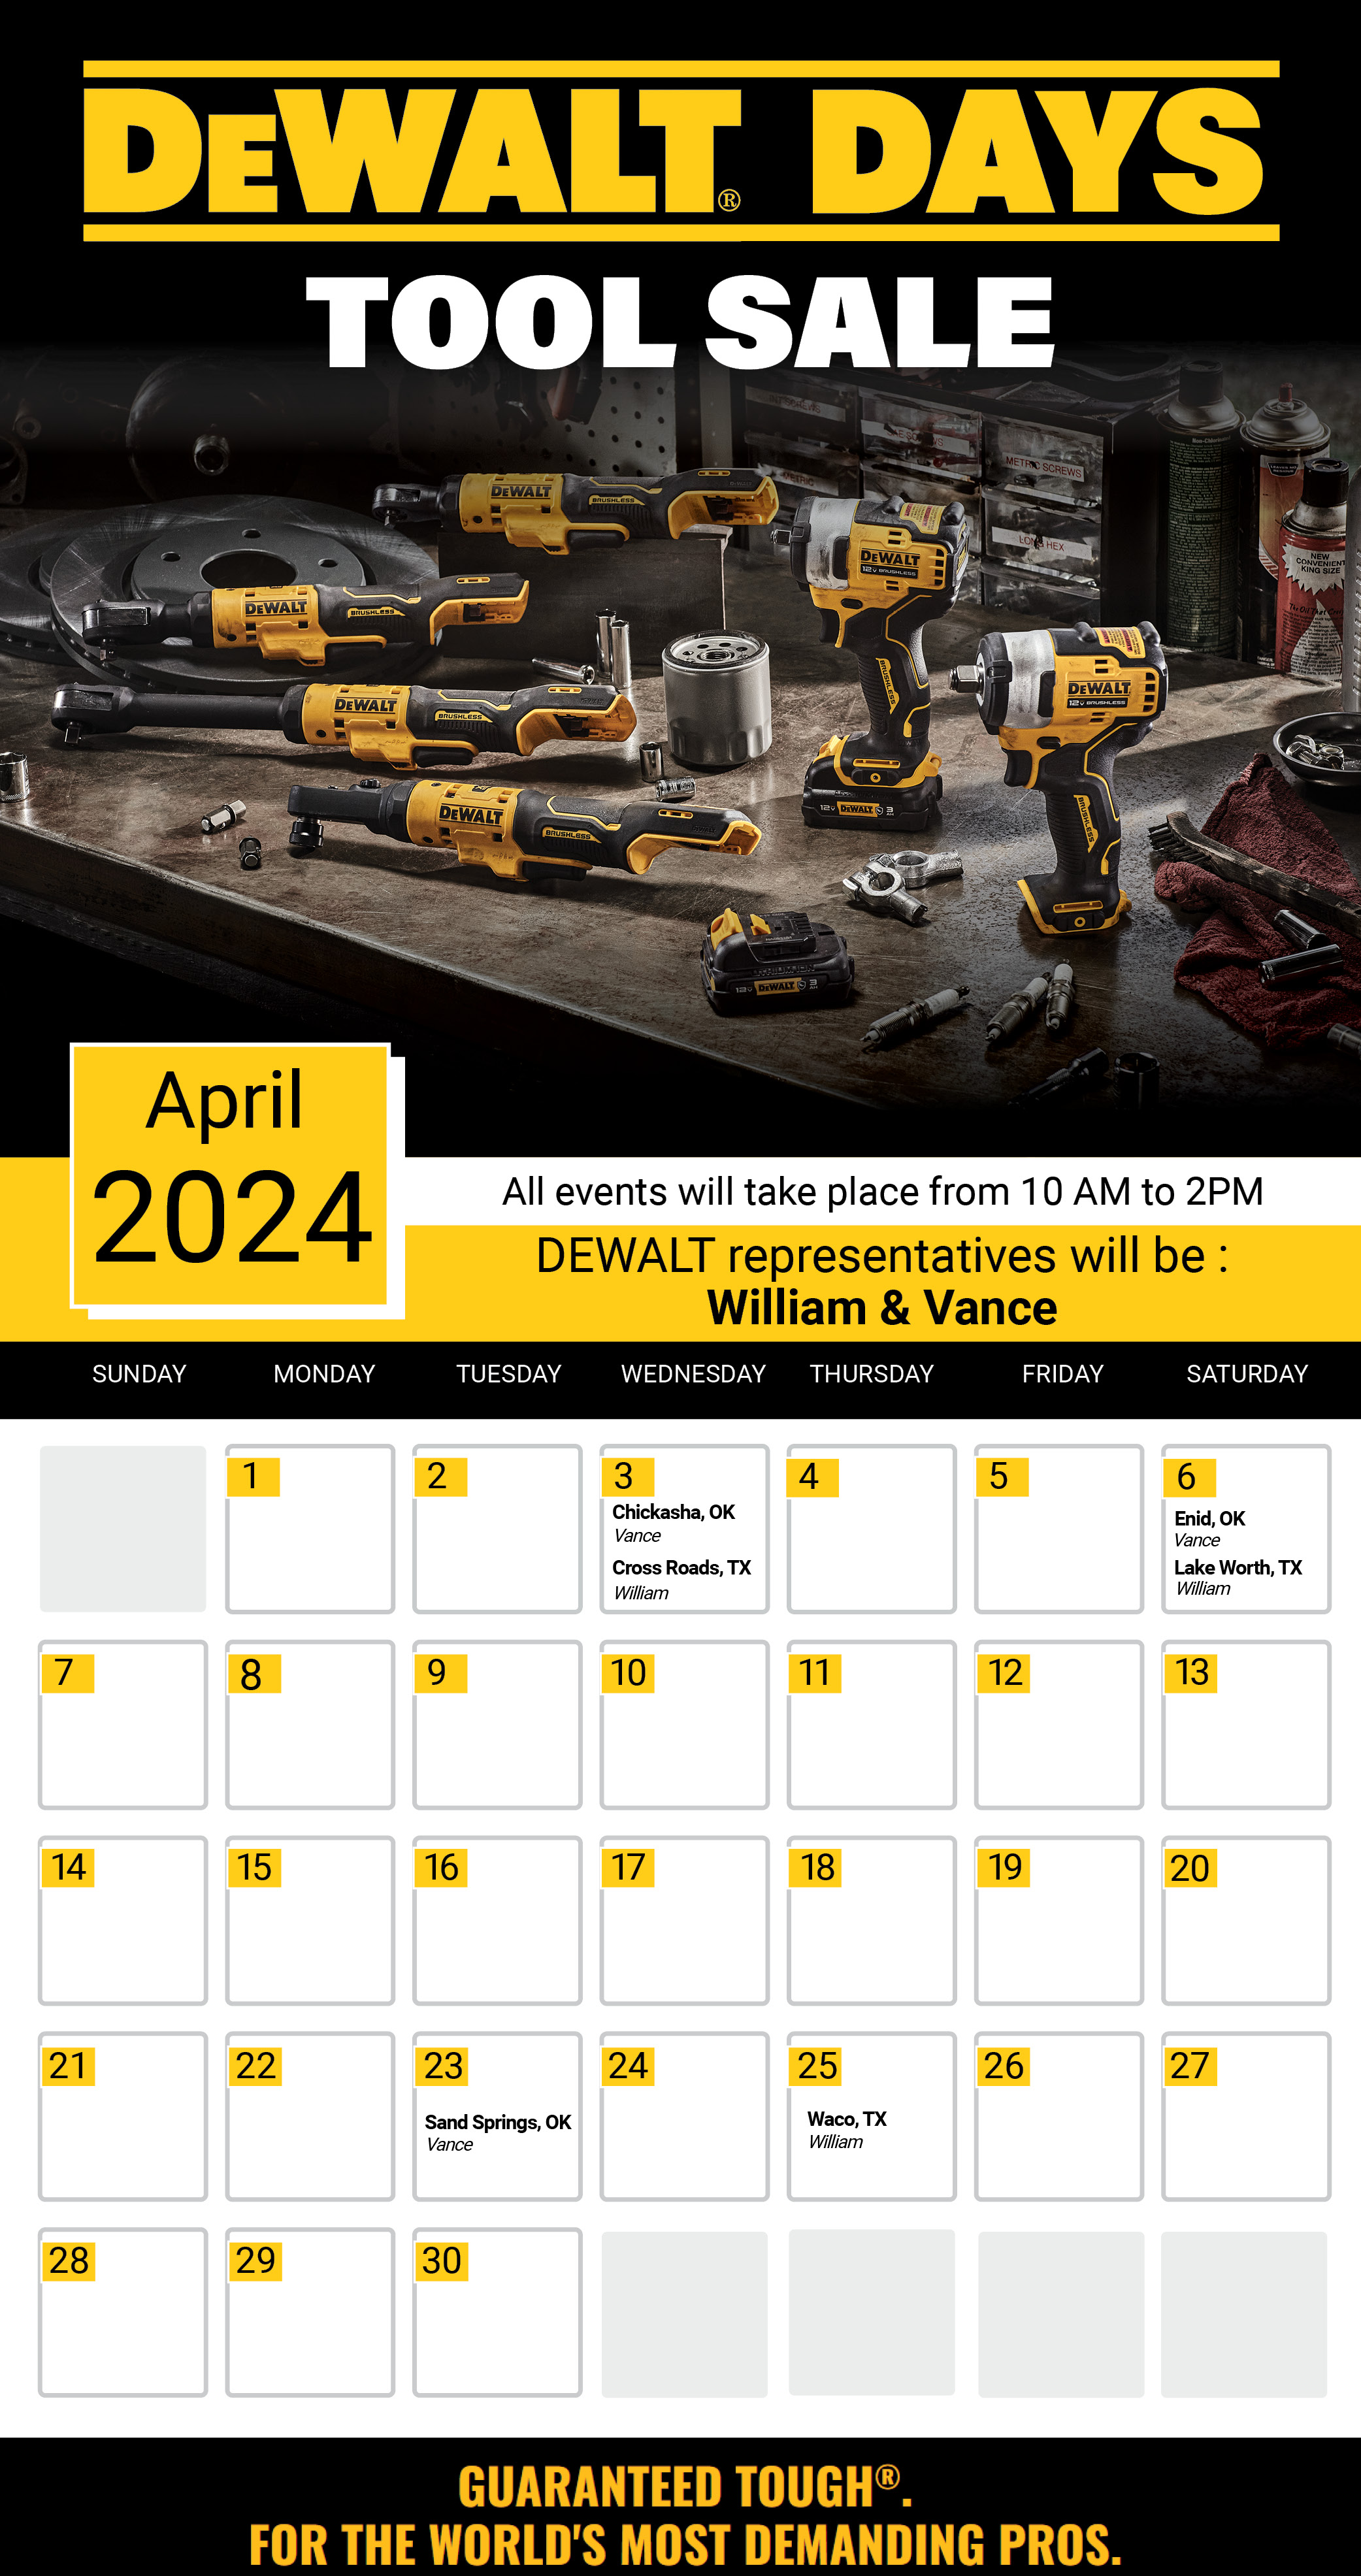 DeWakt Days Tool Sale. April 2024. All Events will take place from 10 am to 2pm. DeWalt representatives will be William and Vance. April 3, Chickasha, OK and Cross Roads, TX. April 6, Enid, OK and Lake Worth, TX. April 23 Sand Springs, OK. April 25 Waco, TX. Guaranteed Tough For the world's most demanding pros.